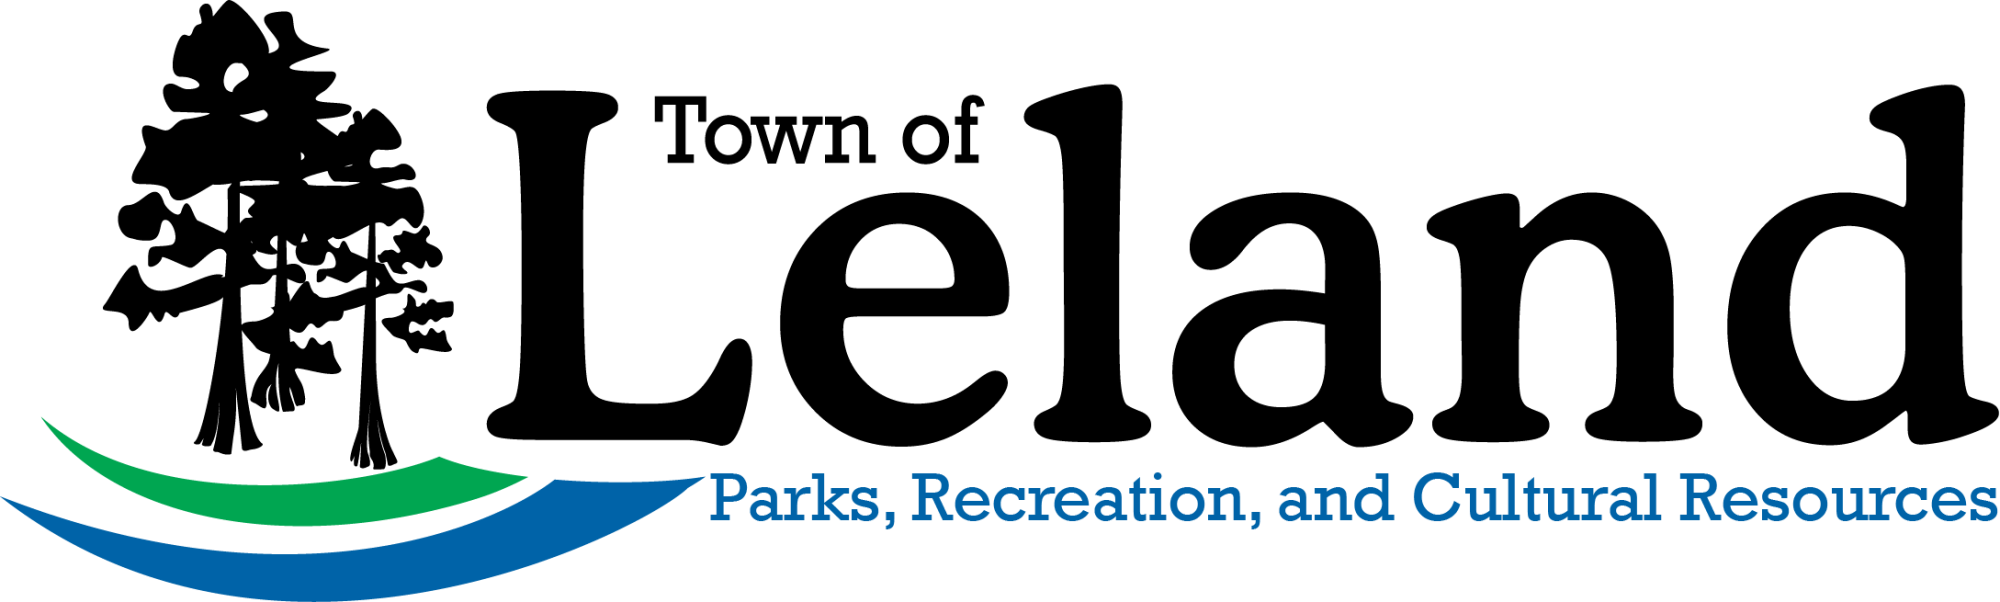 Leland Parks, Recreation, and Cultural Resources logo